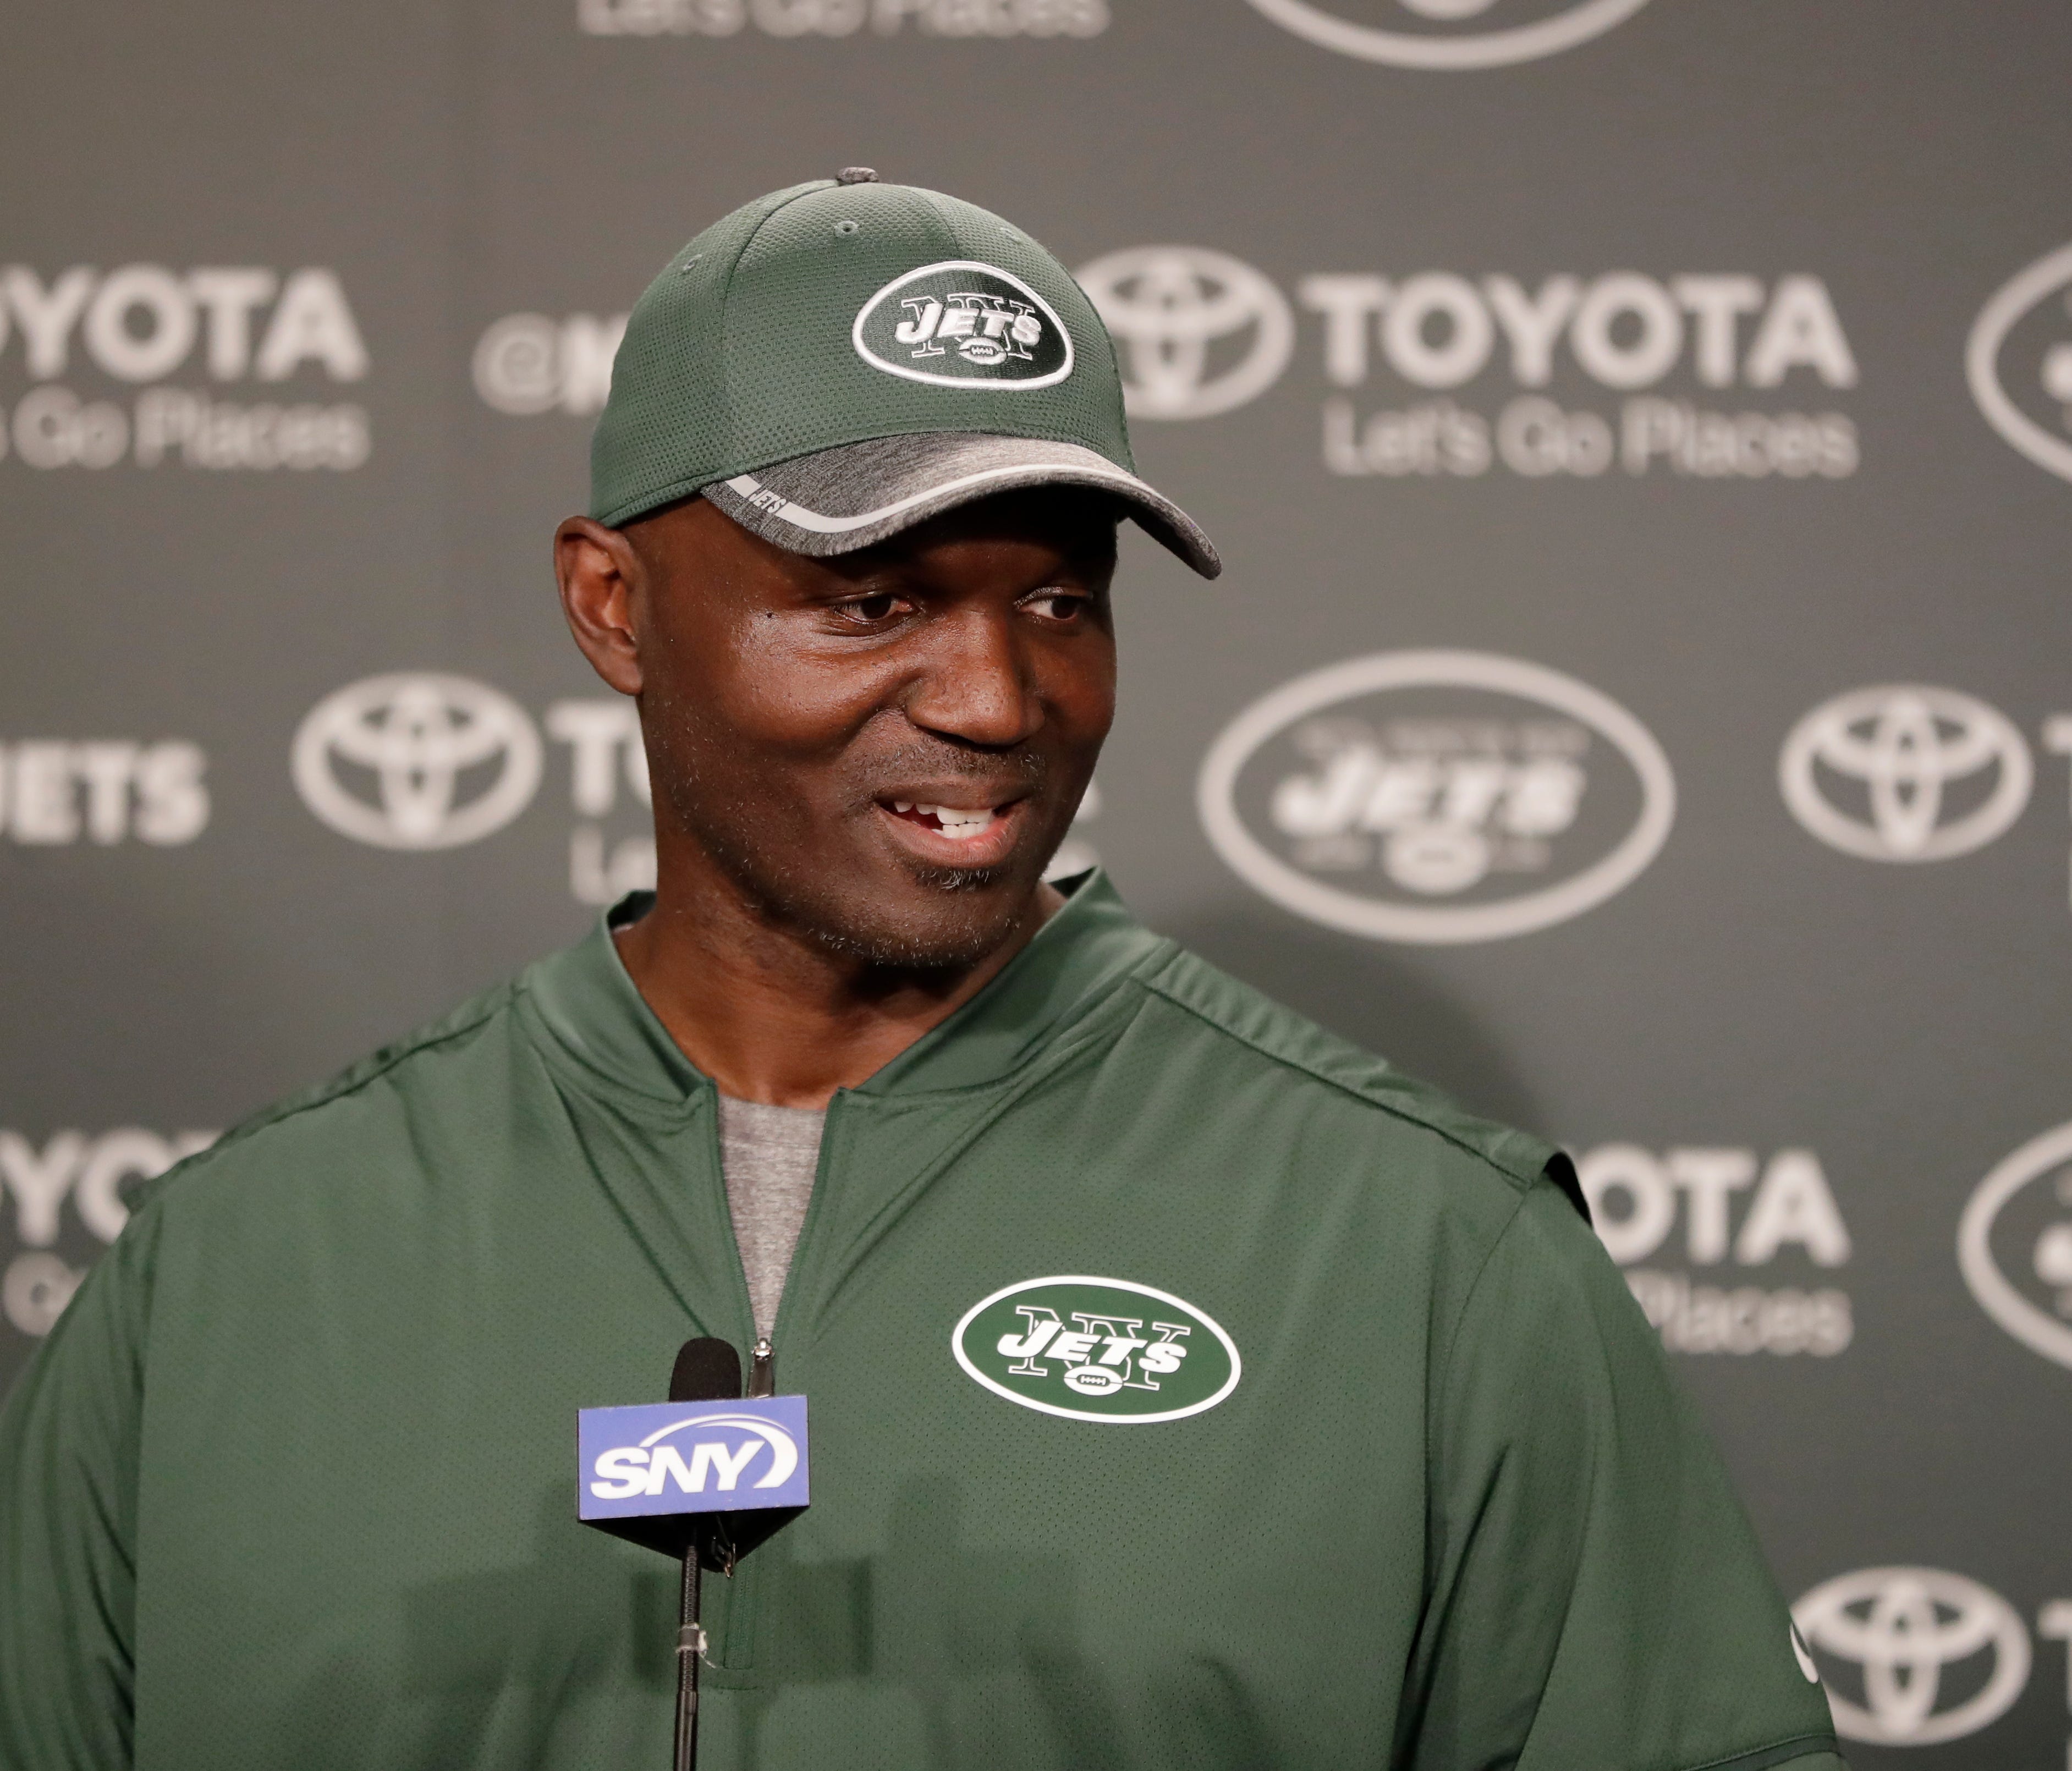 New York Jets head coach Todd Bowles talks to reporters during NFL football practice, Tuesday, June 13, 2017, in Florham Park, N.J. (AP Photo/Julio Cortez)